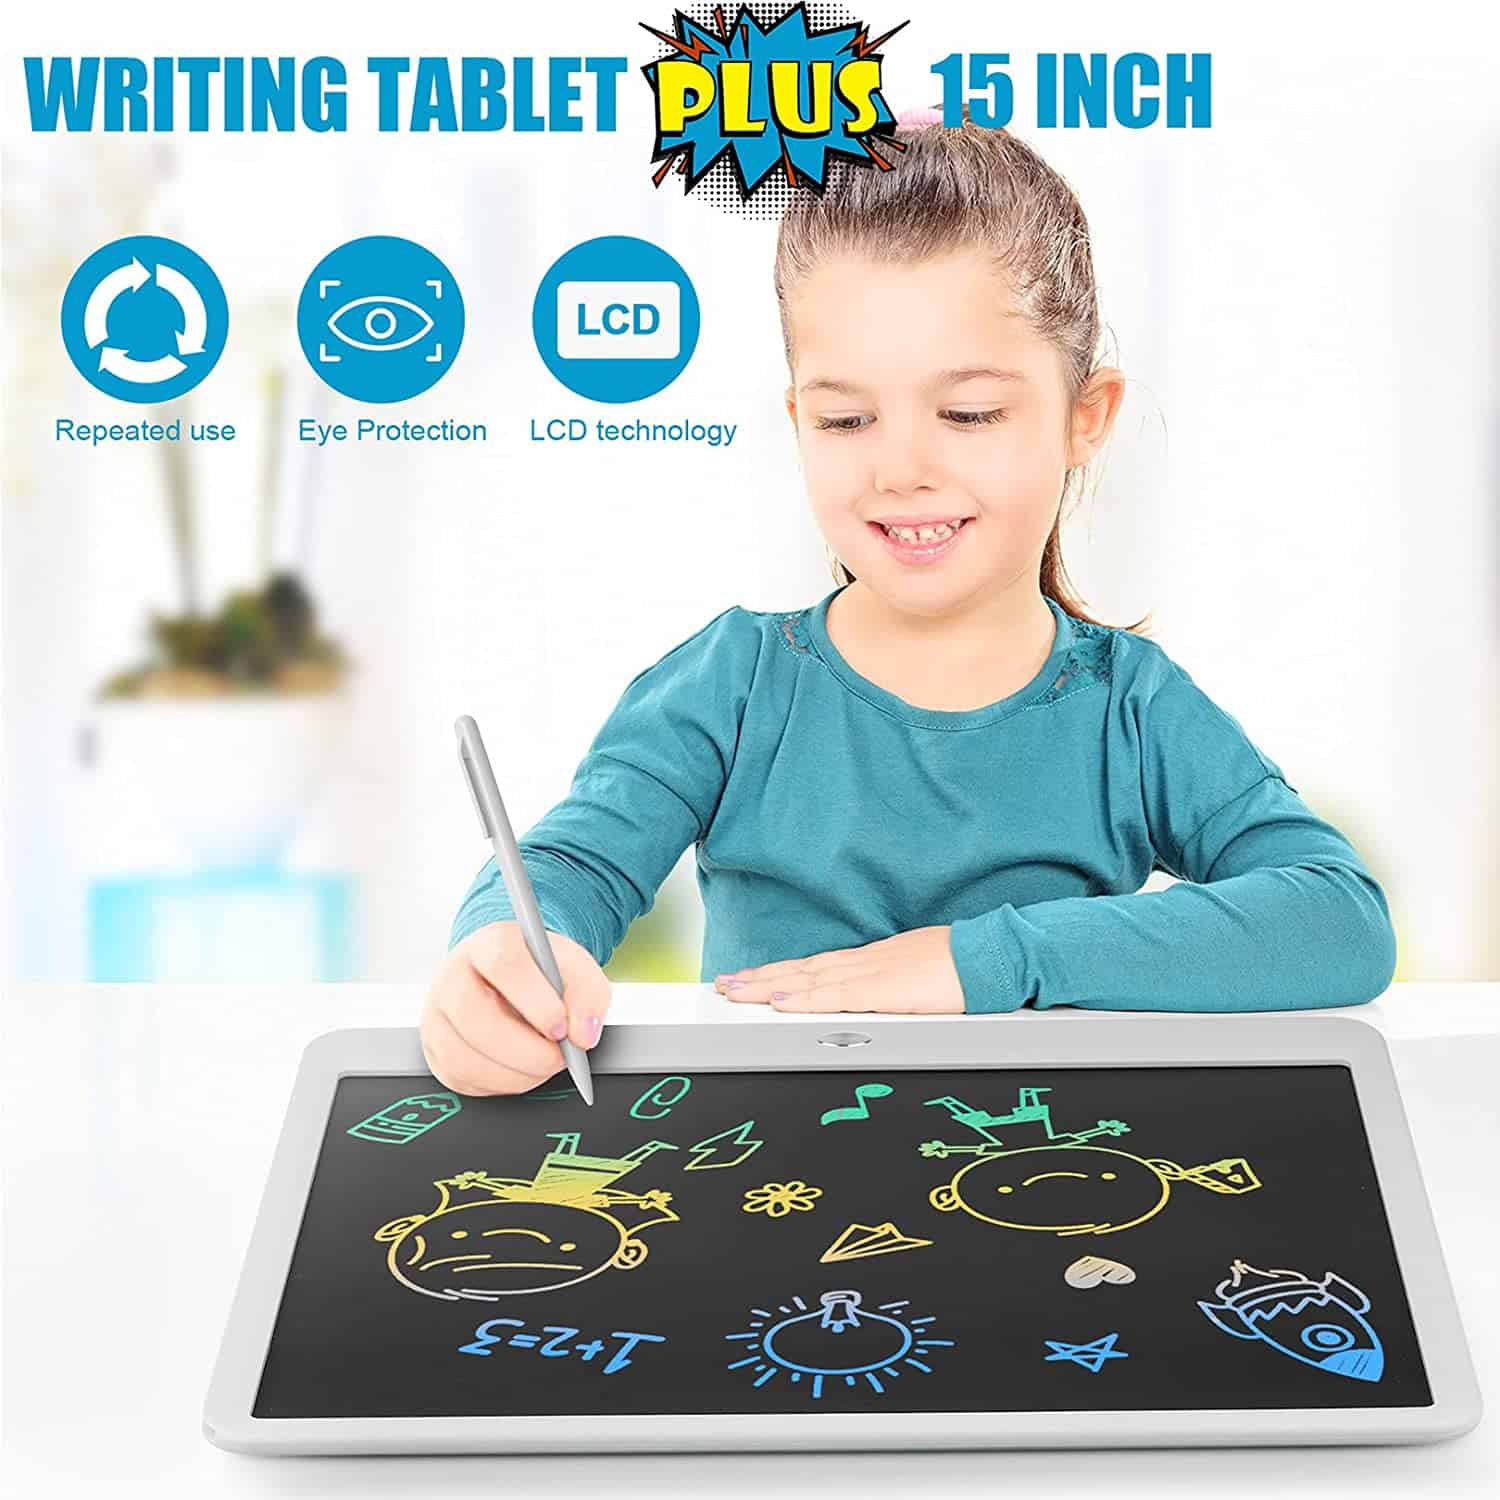 Drawing Tablet Kids Lcd Digital Graphics Writing Paint Doodle